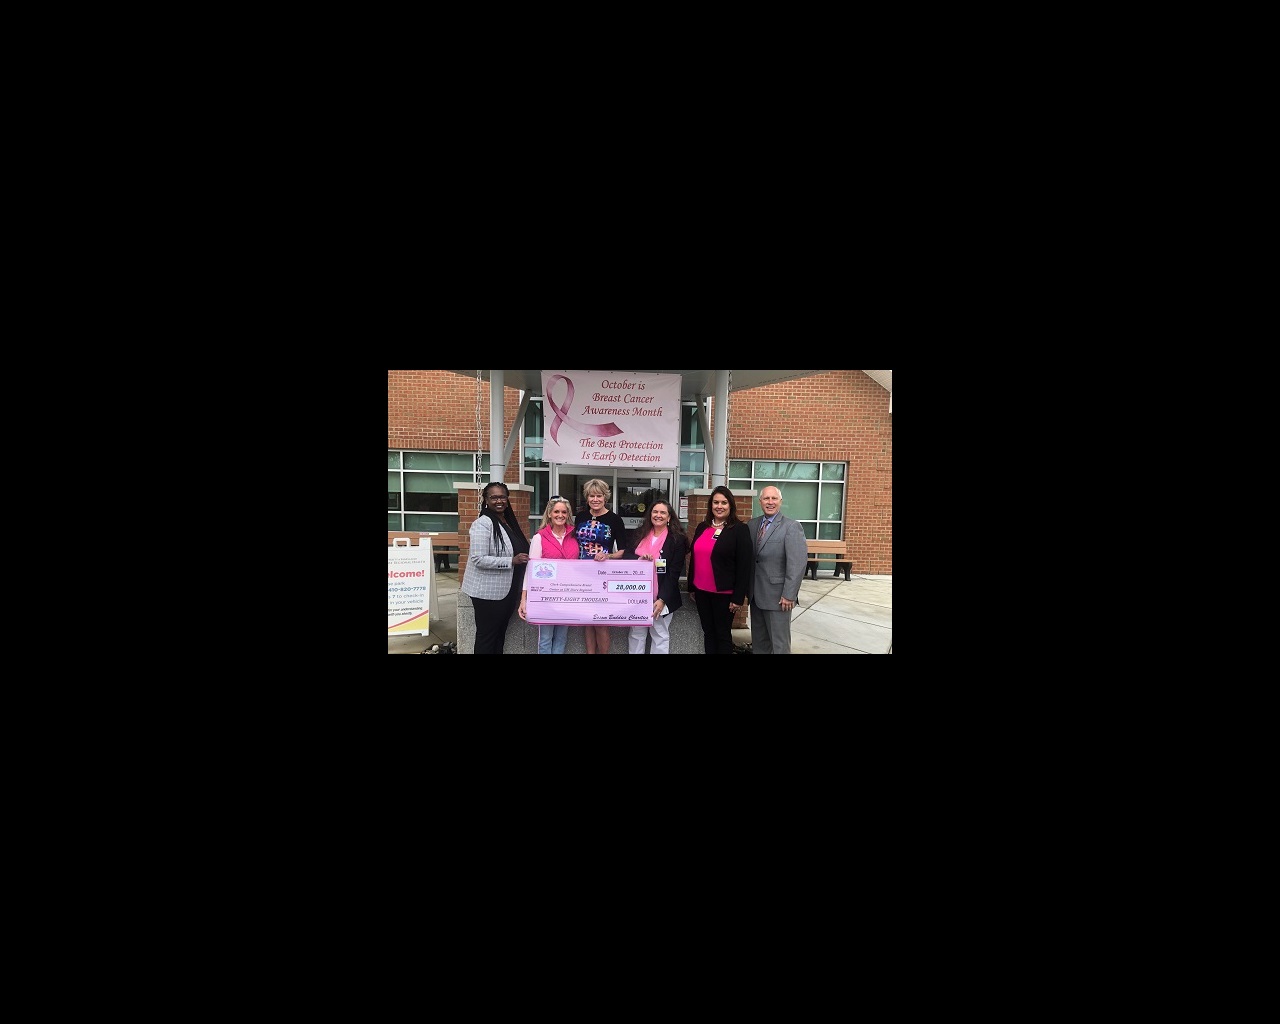 Six people stand in front of a sign that reads, "October is Breast Cancer Awareness Month. The Best Protection is Early Detection."